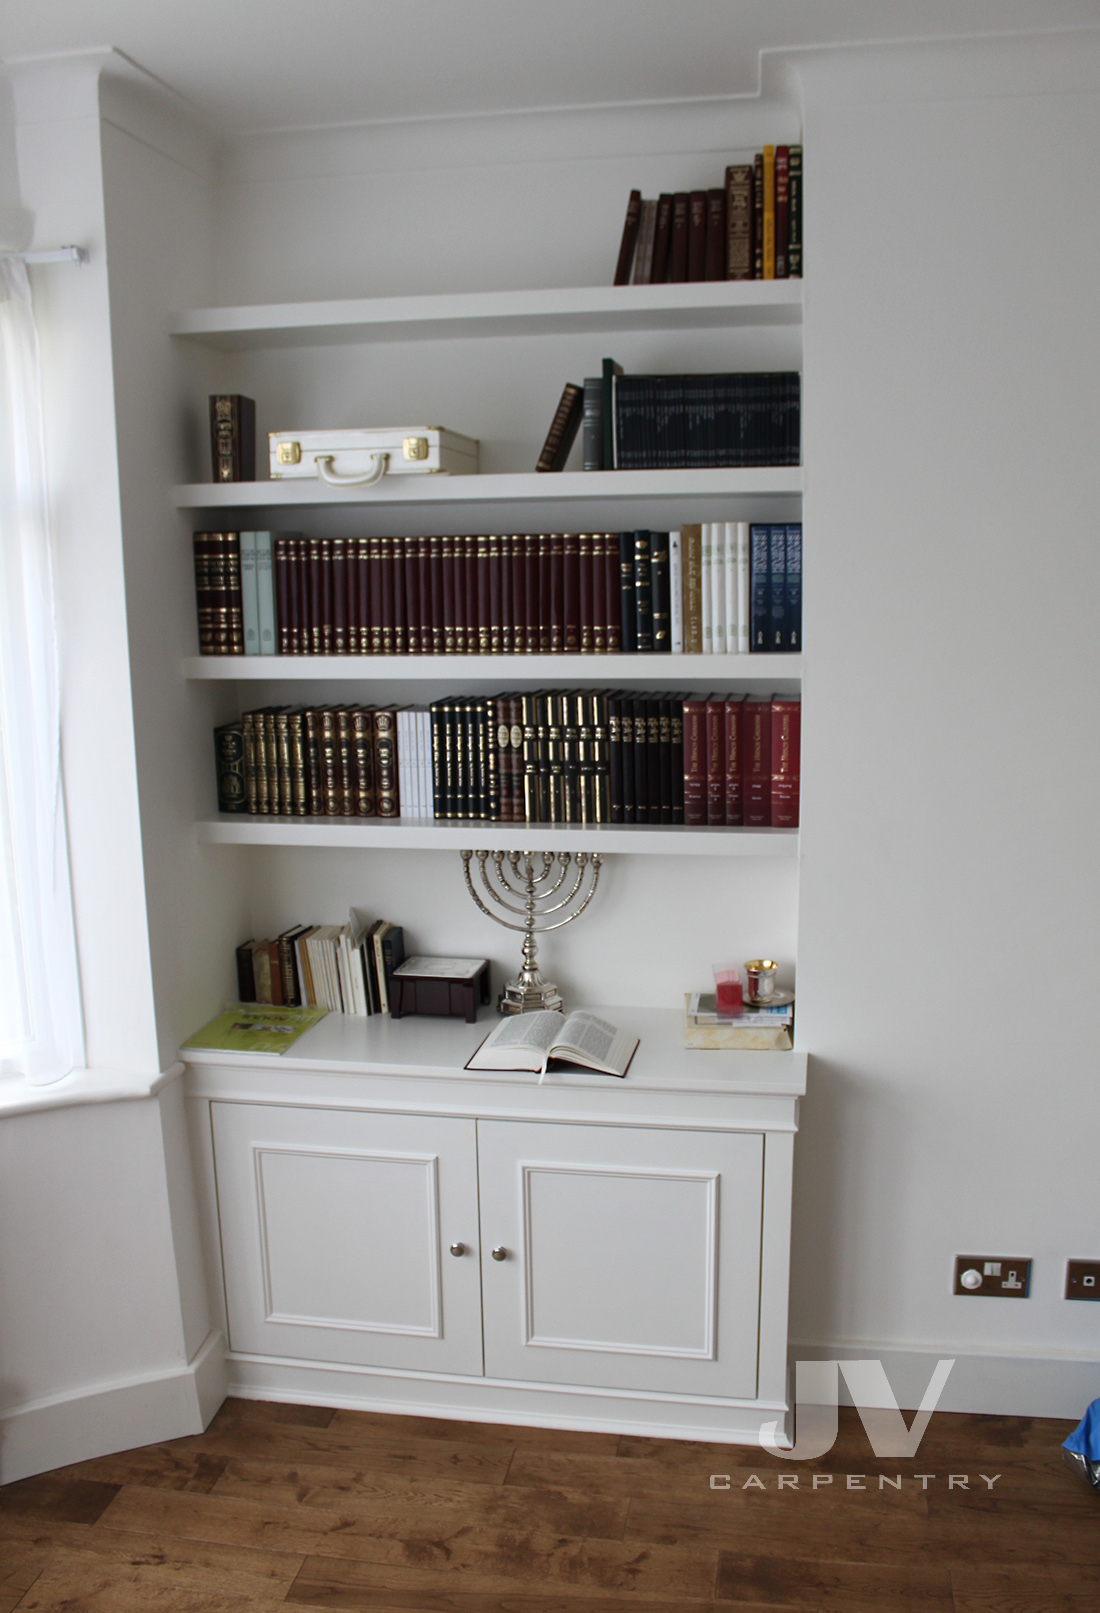 traditional cabinets with floating shelves (LHS)